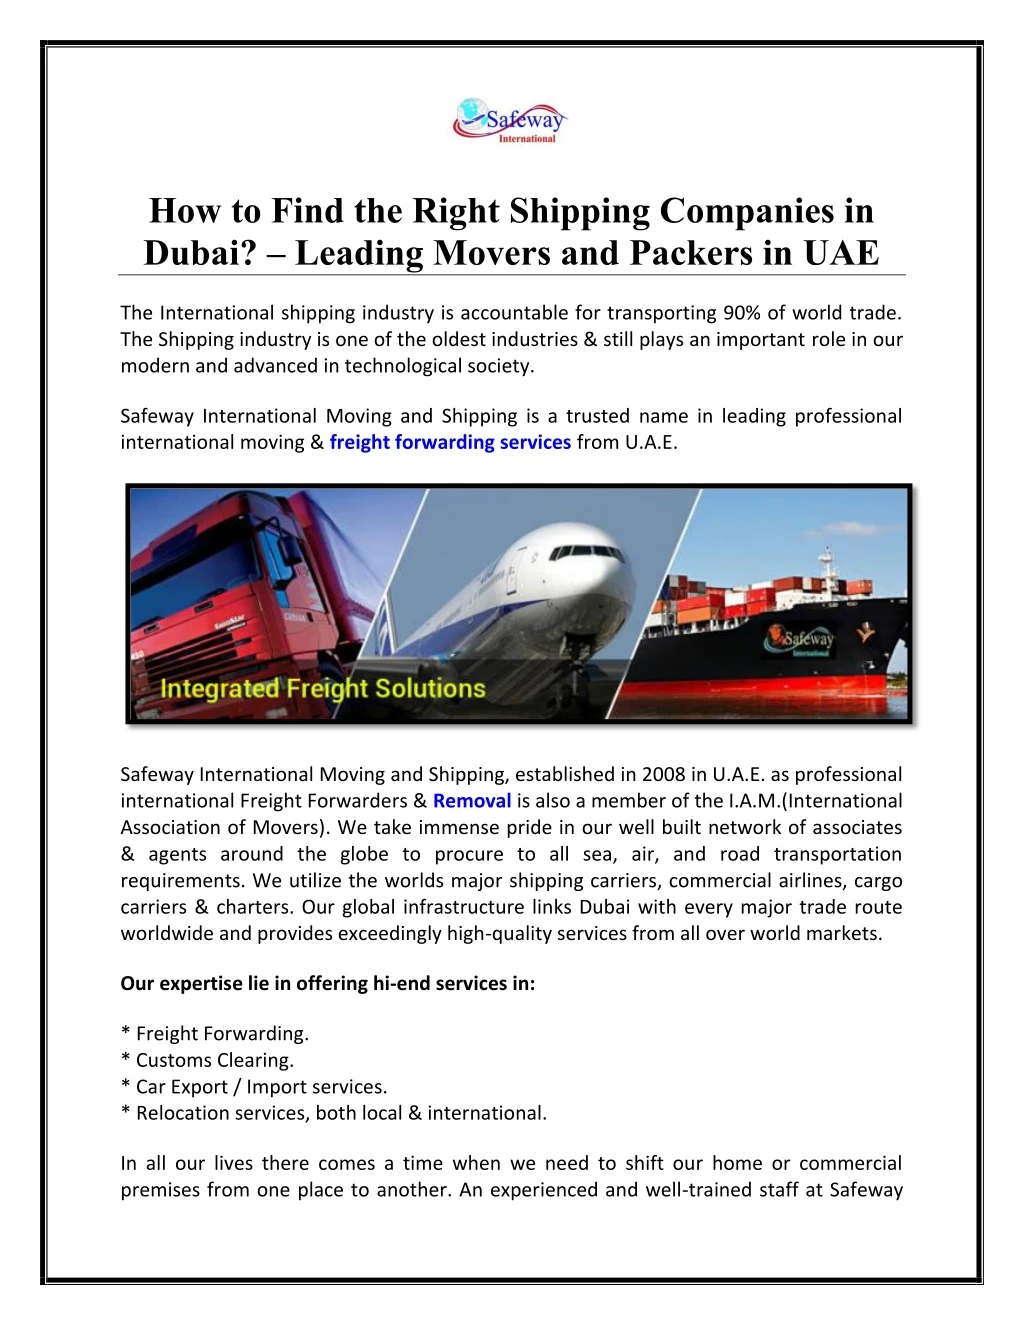 how to find the right shipping companies in dubai